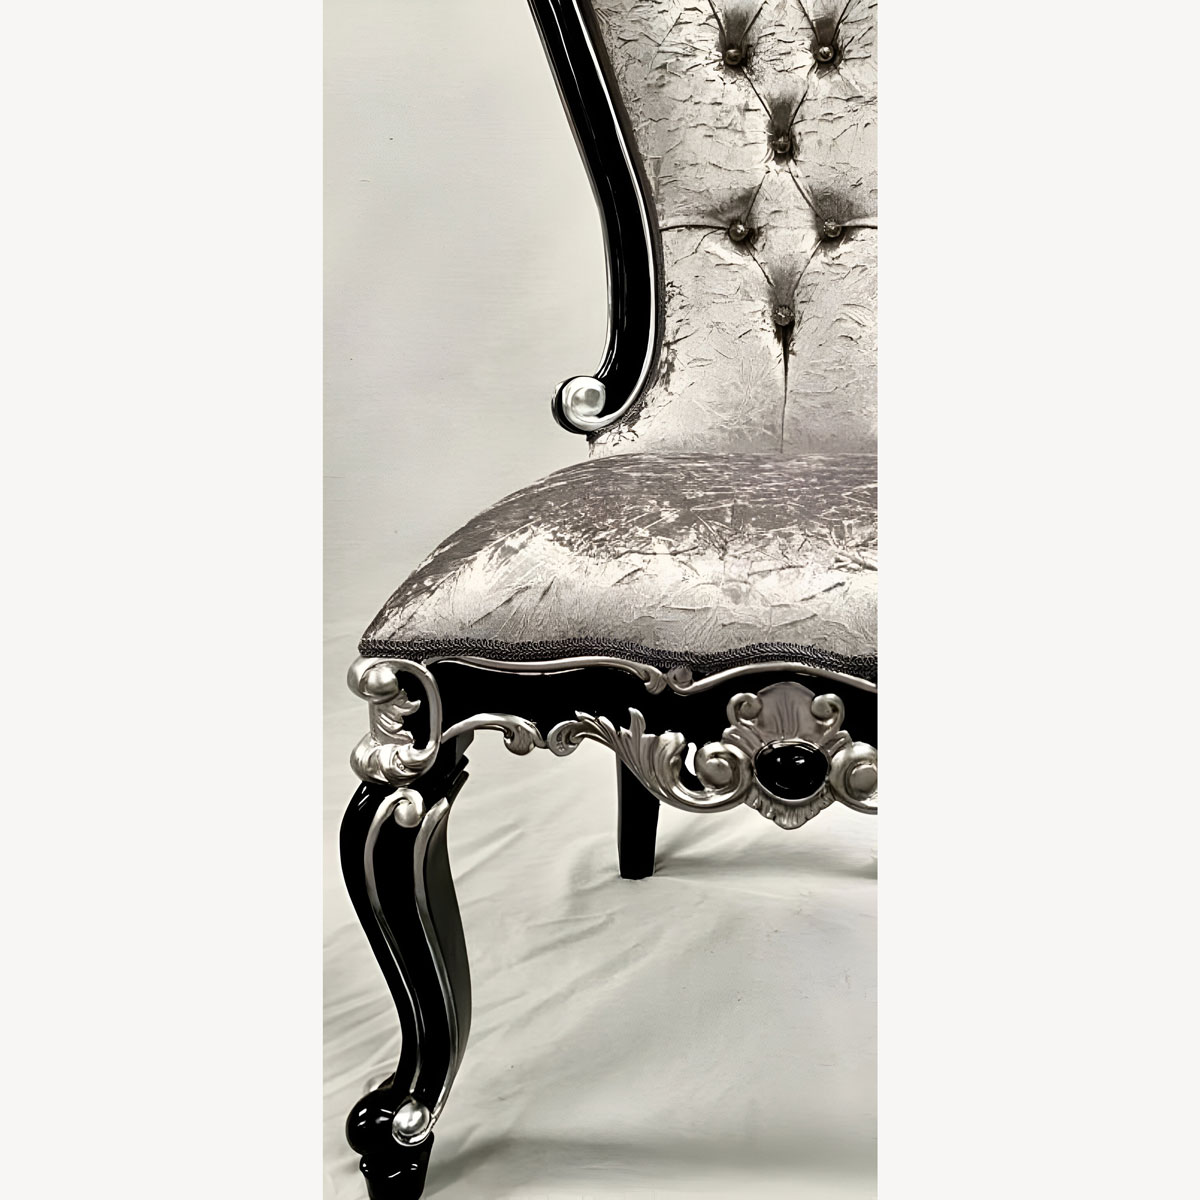 Mayfair Dining Throne Chair In Black With Silver Detailing Upholstered Silver Crushed Velvet Crystals 3 - Hampshire Barn Interiors - Mayfair Dining Throne Chair In Black With Silver Detailing Upholstered Silver Crushed Velvet Crystals -